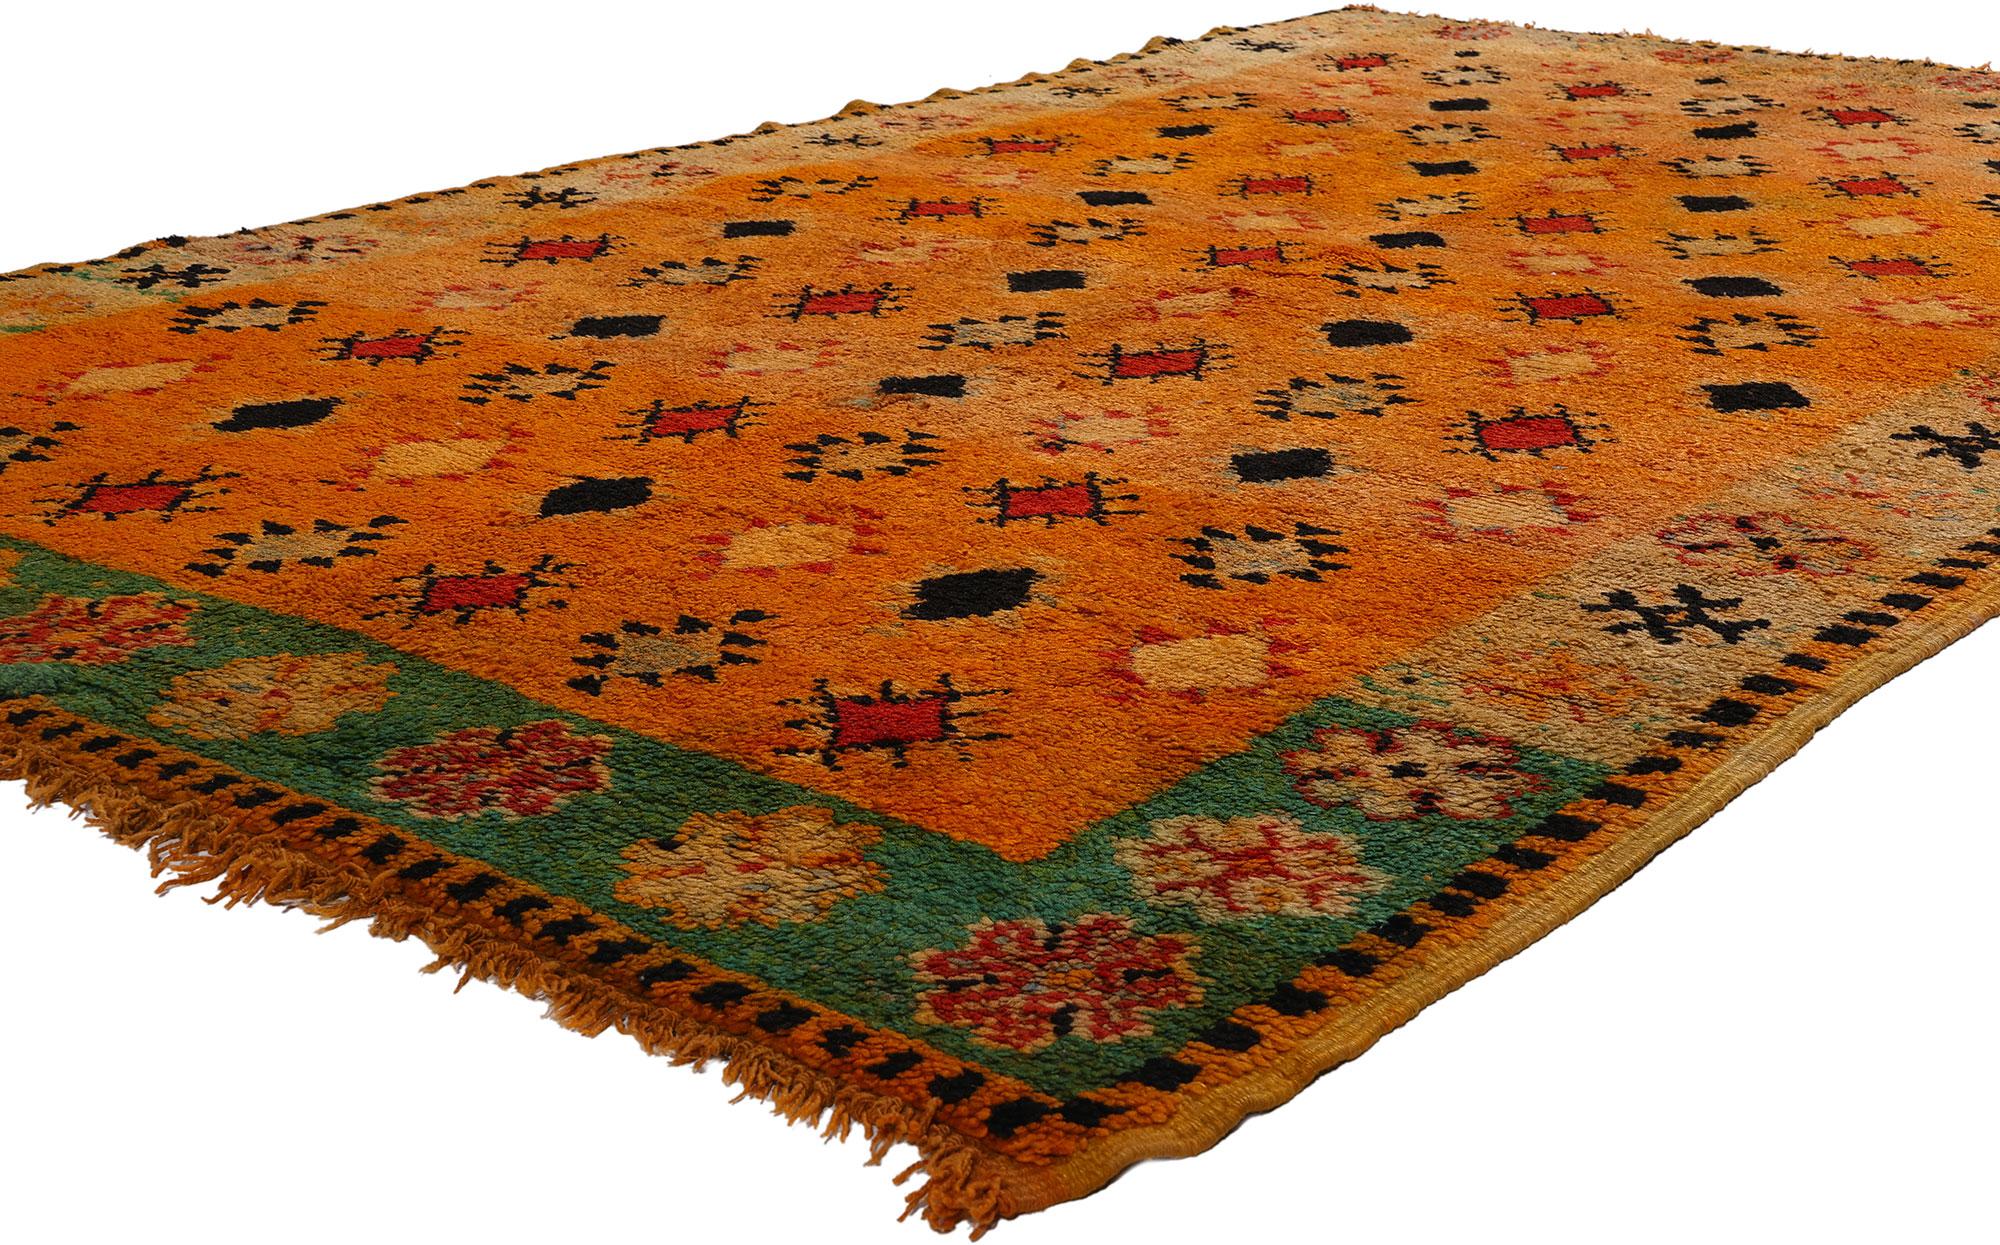 20173 Vintage Orange Boujad Moroccan Rug, 05'02 x 09'00. Step into the captivating world of Moroccan heritage with this hand-knotted wool vintage Boujad Moroccan rug. Crafted with meticulous care, its bold orange backdrop radiates warmth and